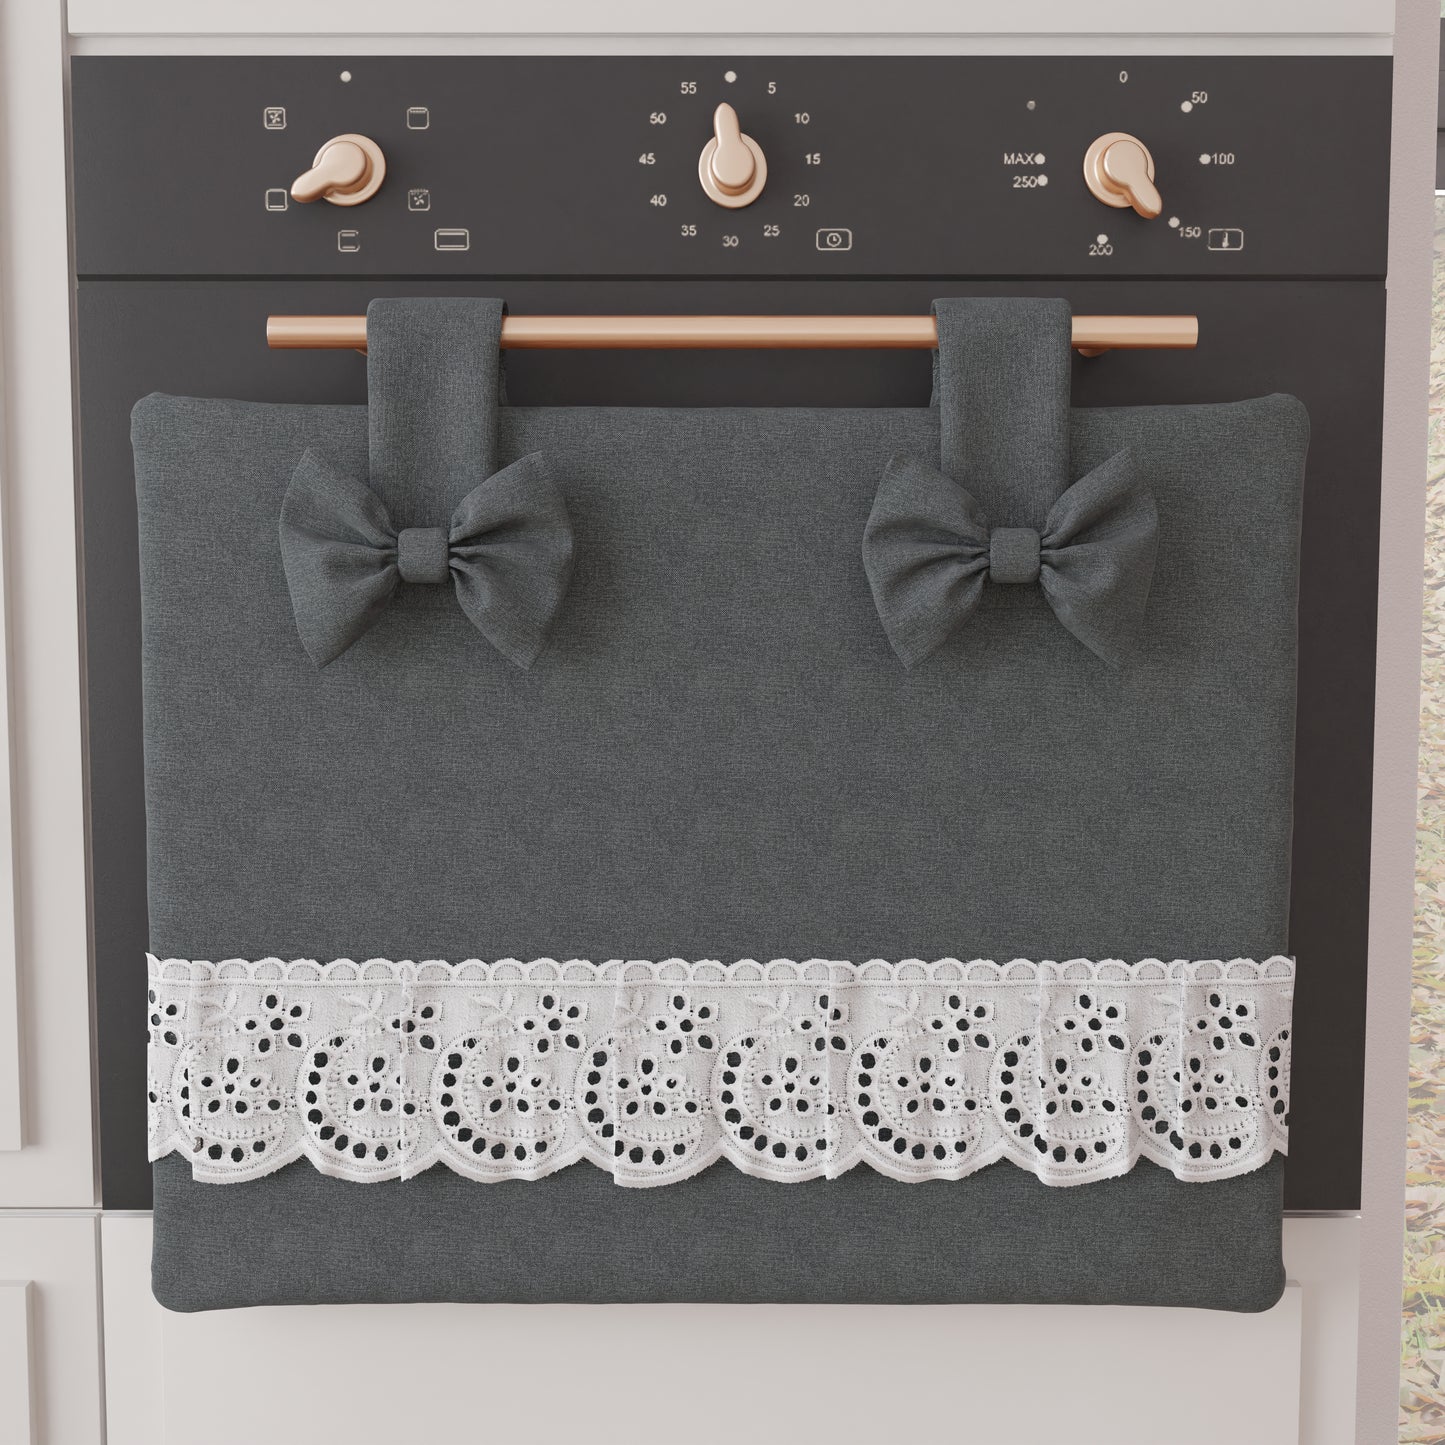 Elegant Shabby Chic Oven Cover with Lace and Dark Gray Bows 